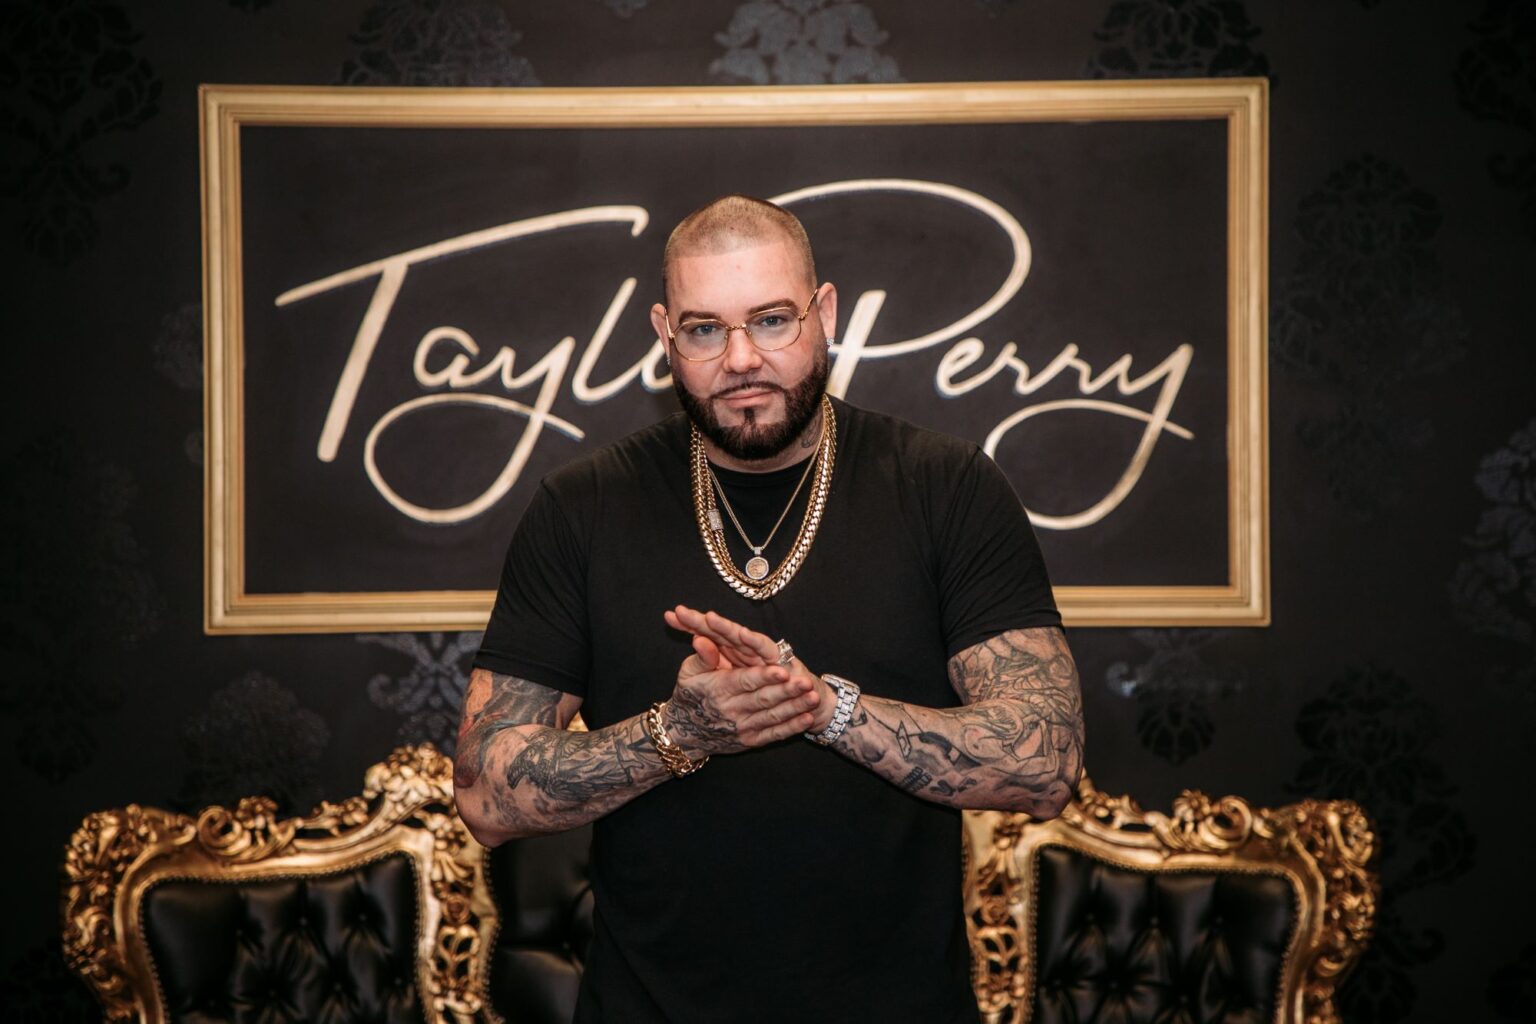 Everyone wants to make their business successful, and Taylor Perry knows how to do it. Get some of his insider tips about achieving success.